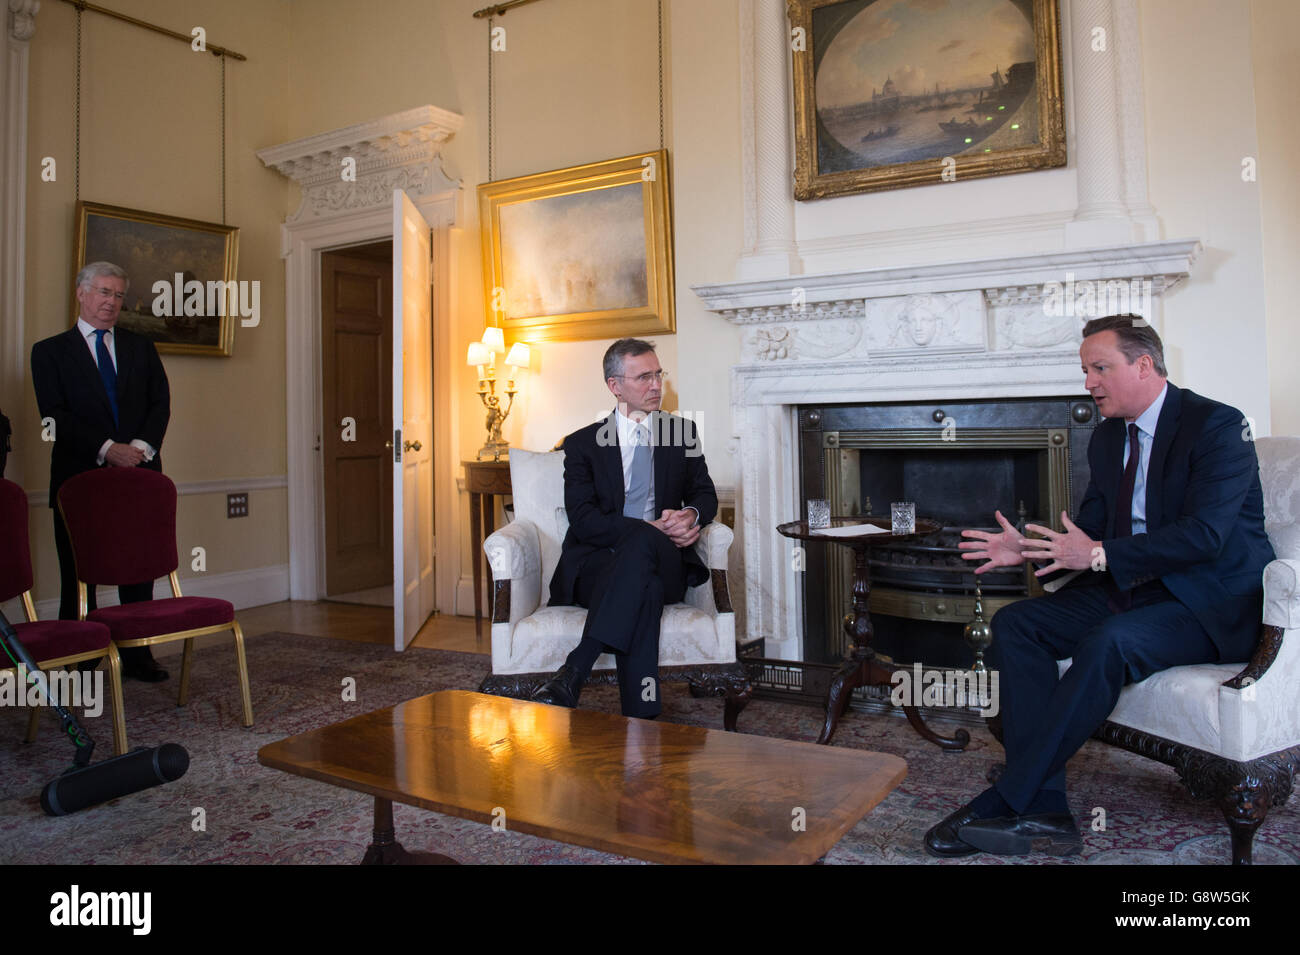 Prime Minister David Cameron (right) with NATO Secretary General Jens Stoltenberg as Defence Secretary Michael Fallon looks on (left) ahead of a bilateral meeting at 10 Downing Street in London. Stock Photo